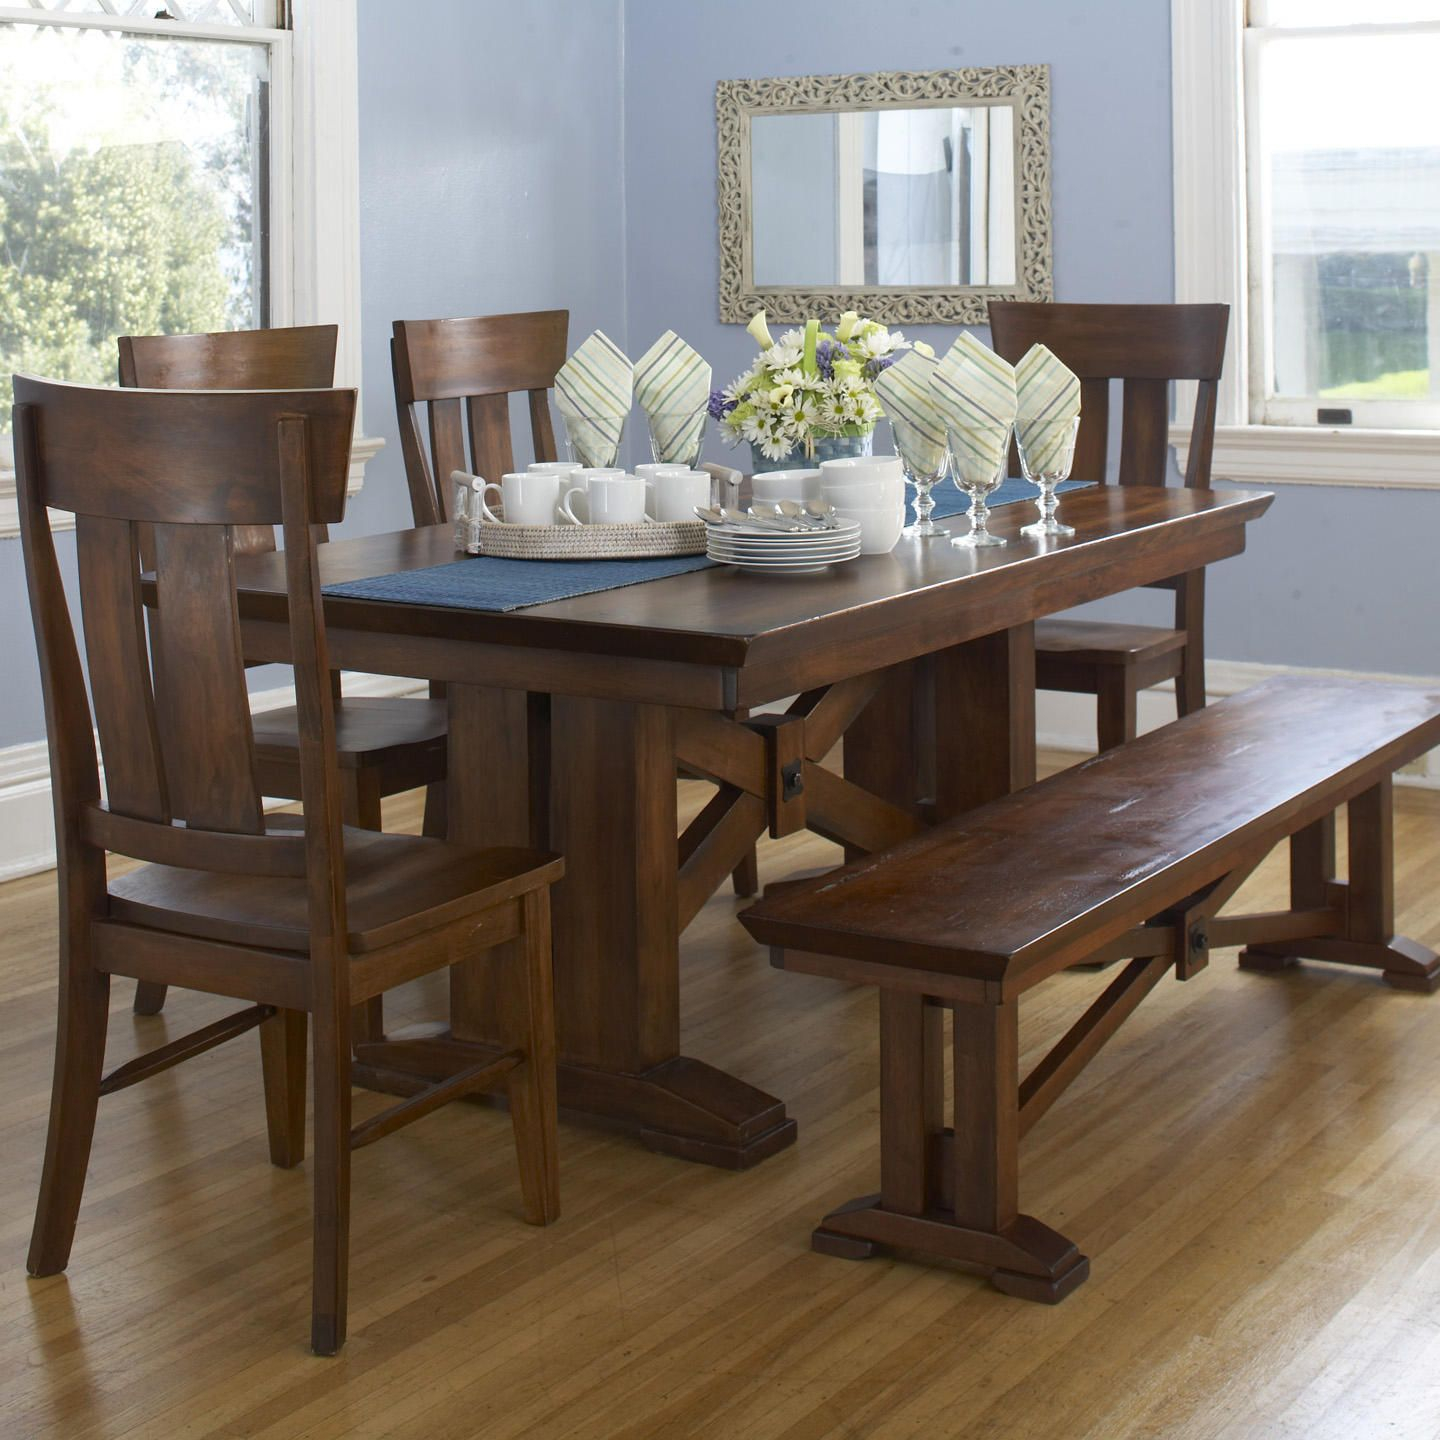 Dining Room Sets $200 • Faucet Ideas Site